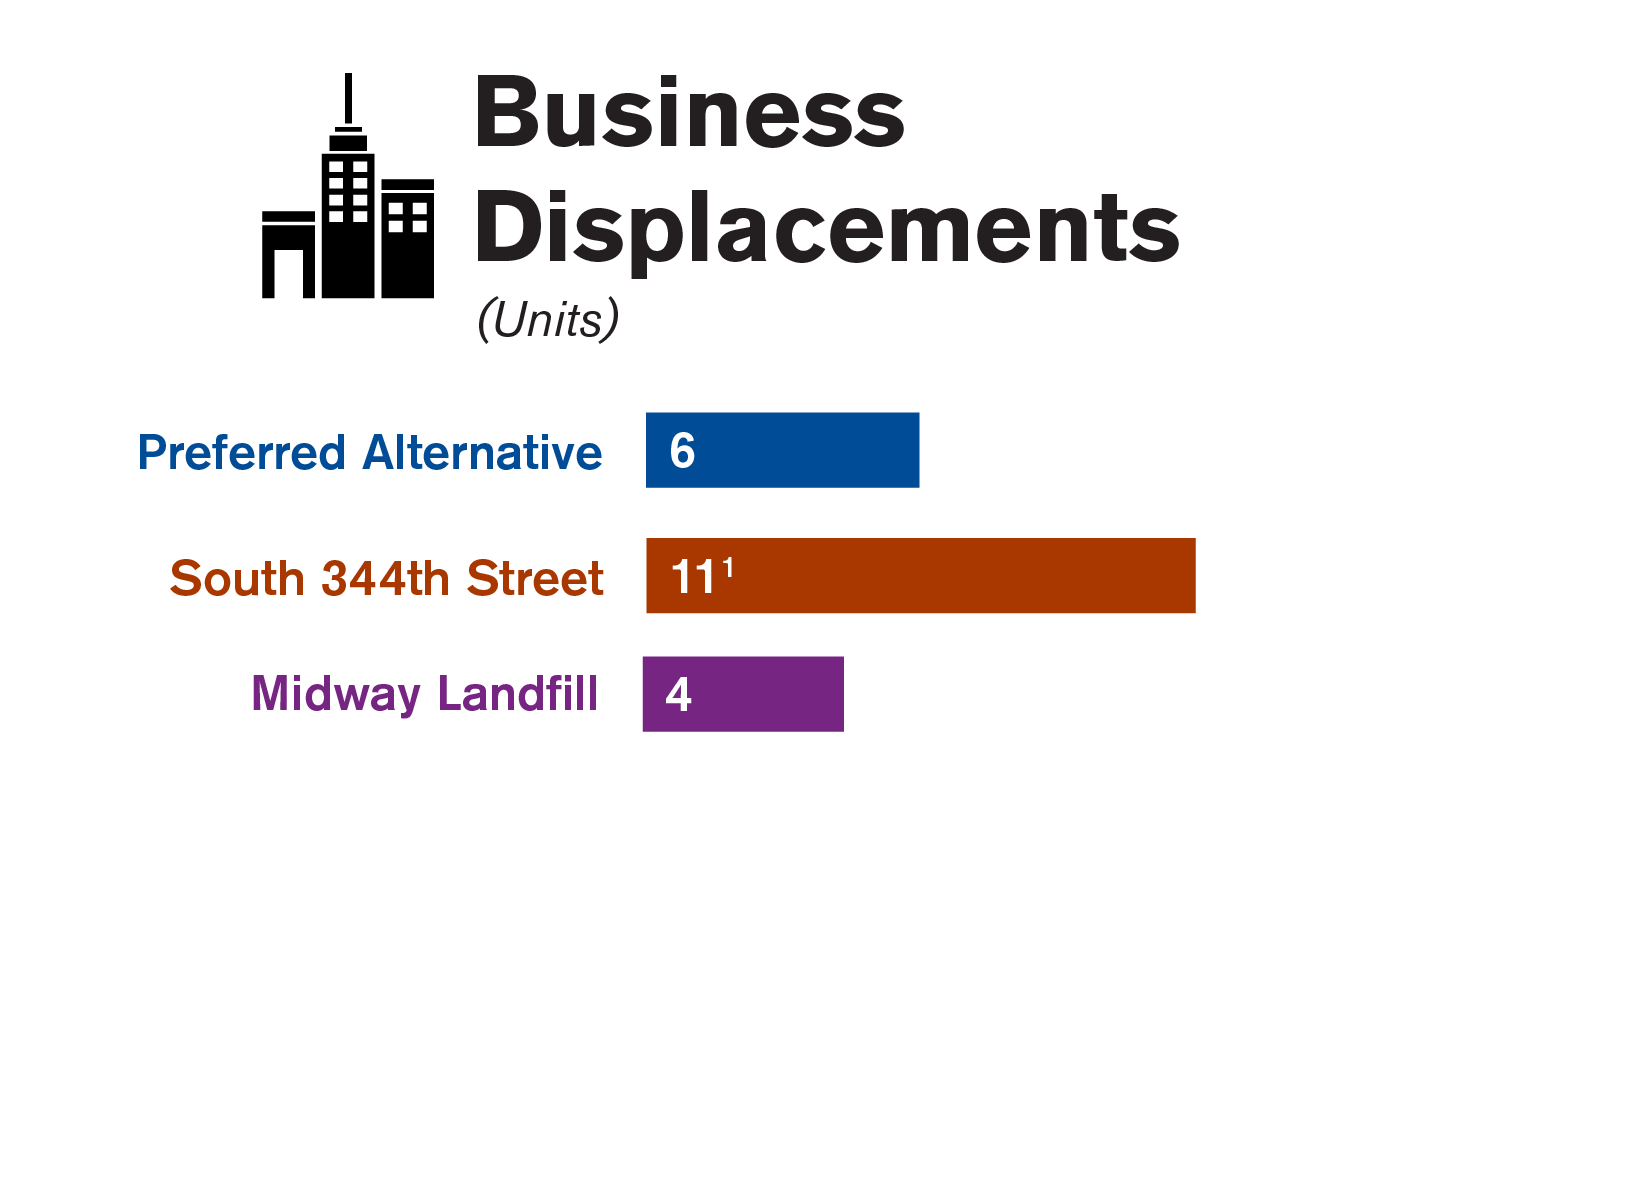 Graphic comparing the business displacements of each of the three site alternatives studied in the Draft EIS.